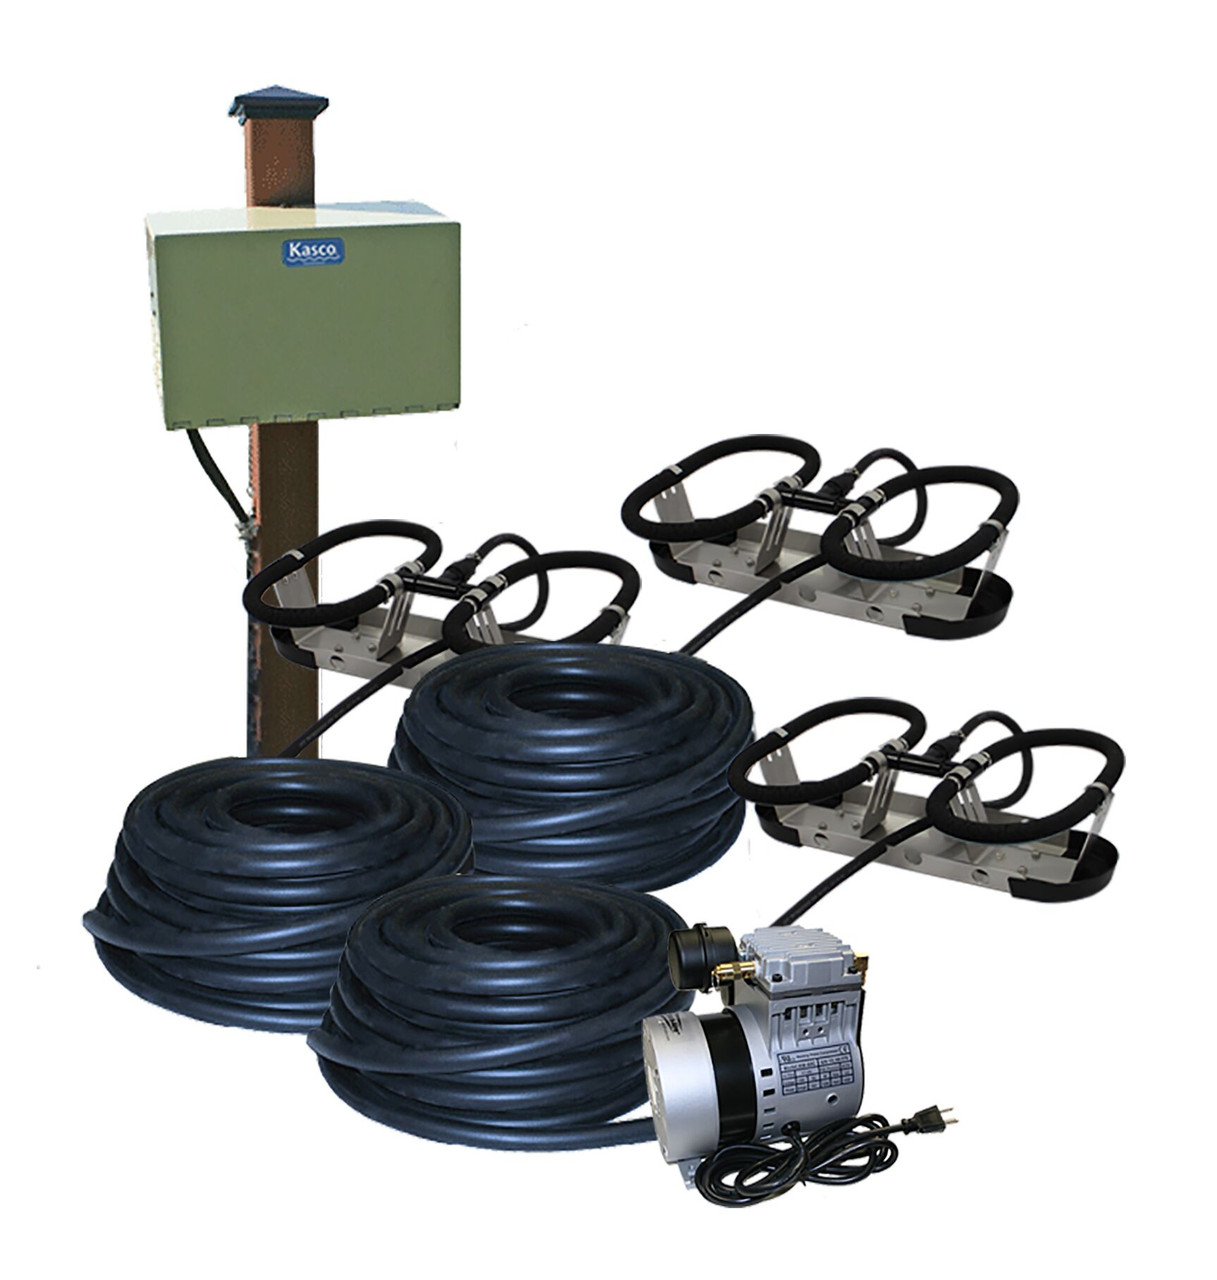 Kasco Robust Aire RA3 Post Mount Cabinet Pond Aeration System